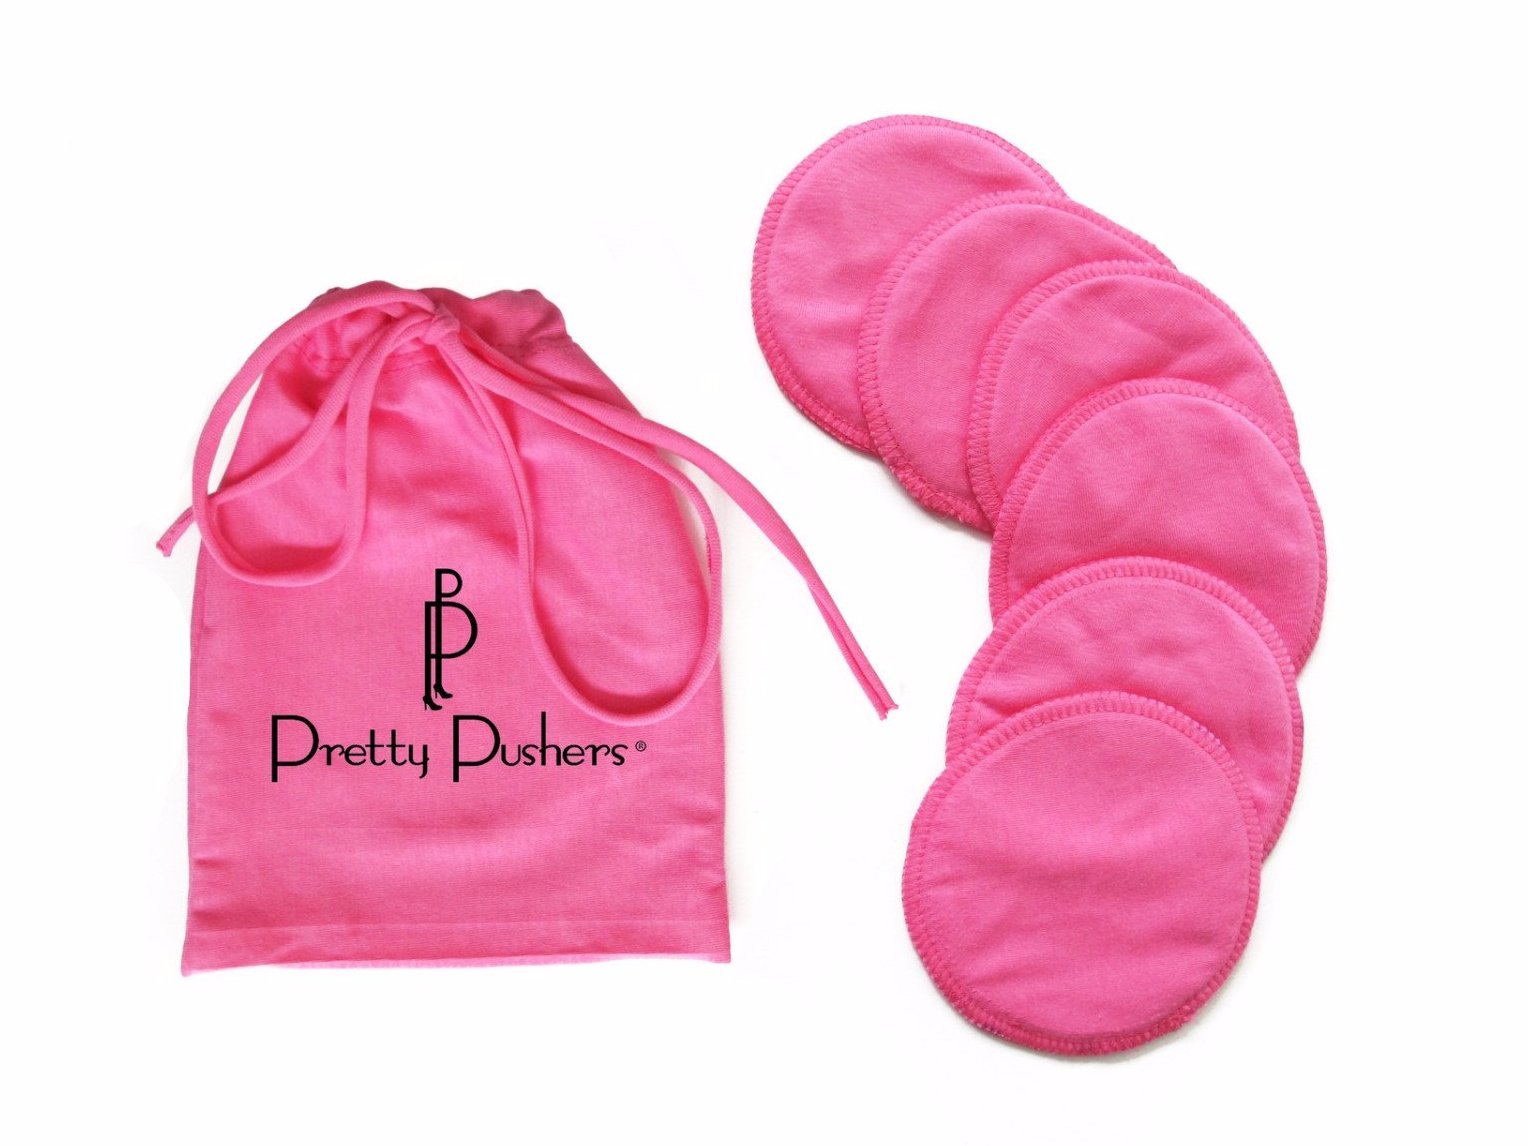 100% cotton washable nursing pads by Pretty Pushers